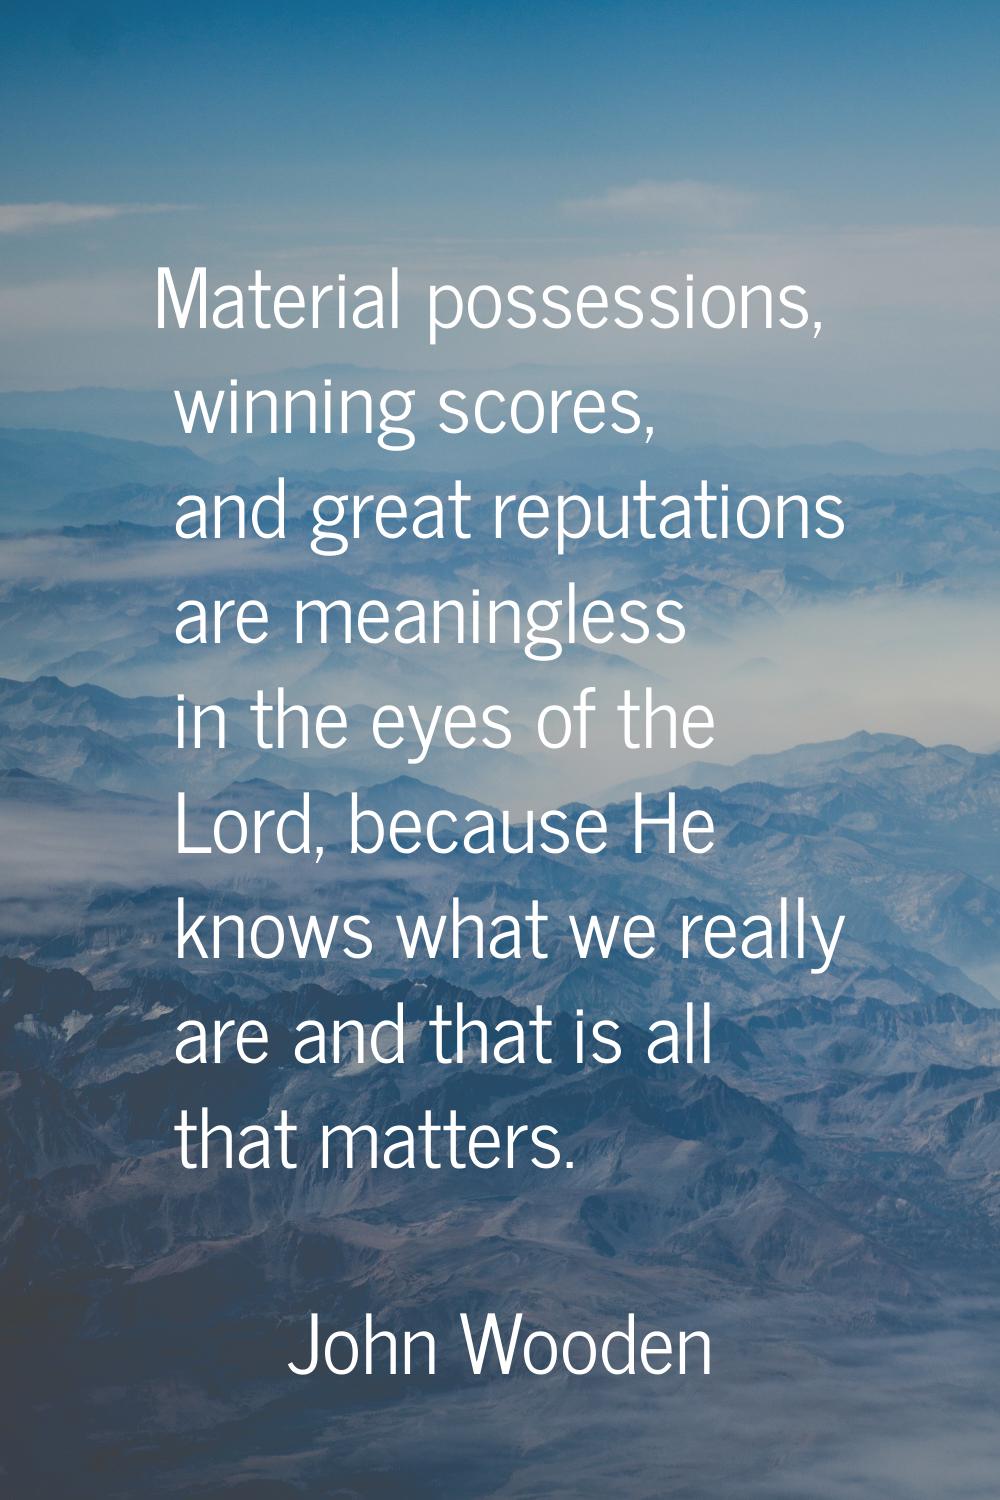 Material possessions, winning scores, and great reputations are meaningless in the eyes of the Lord